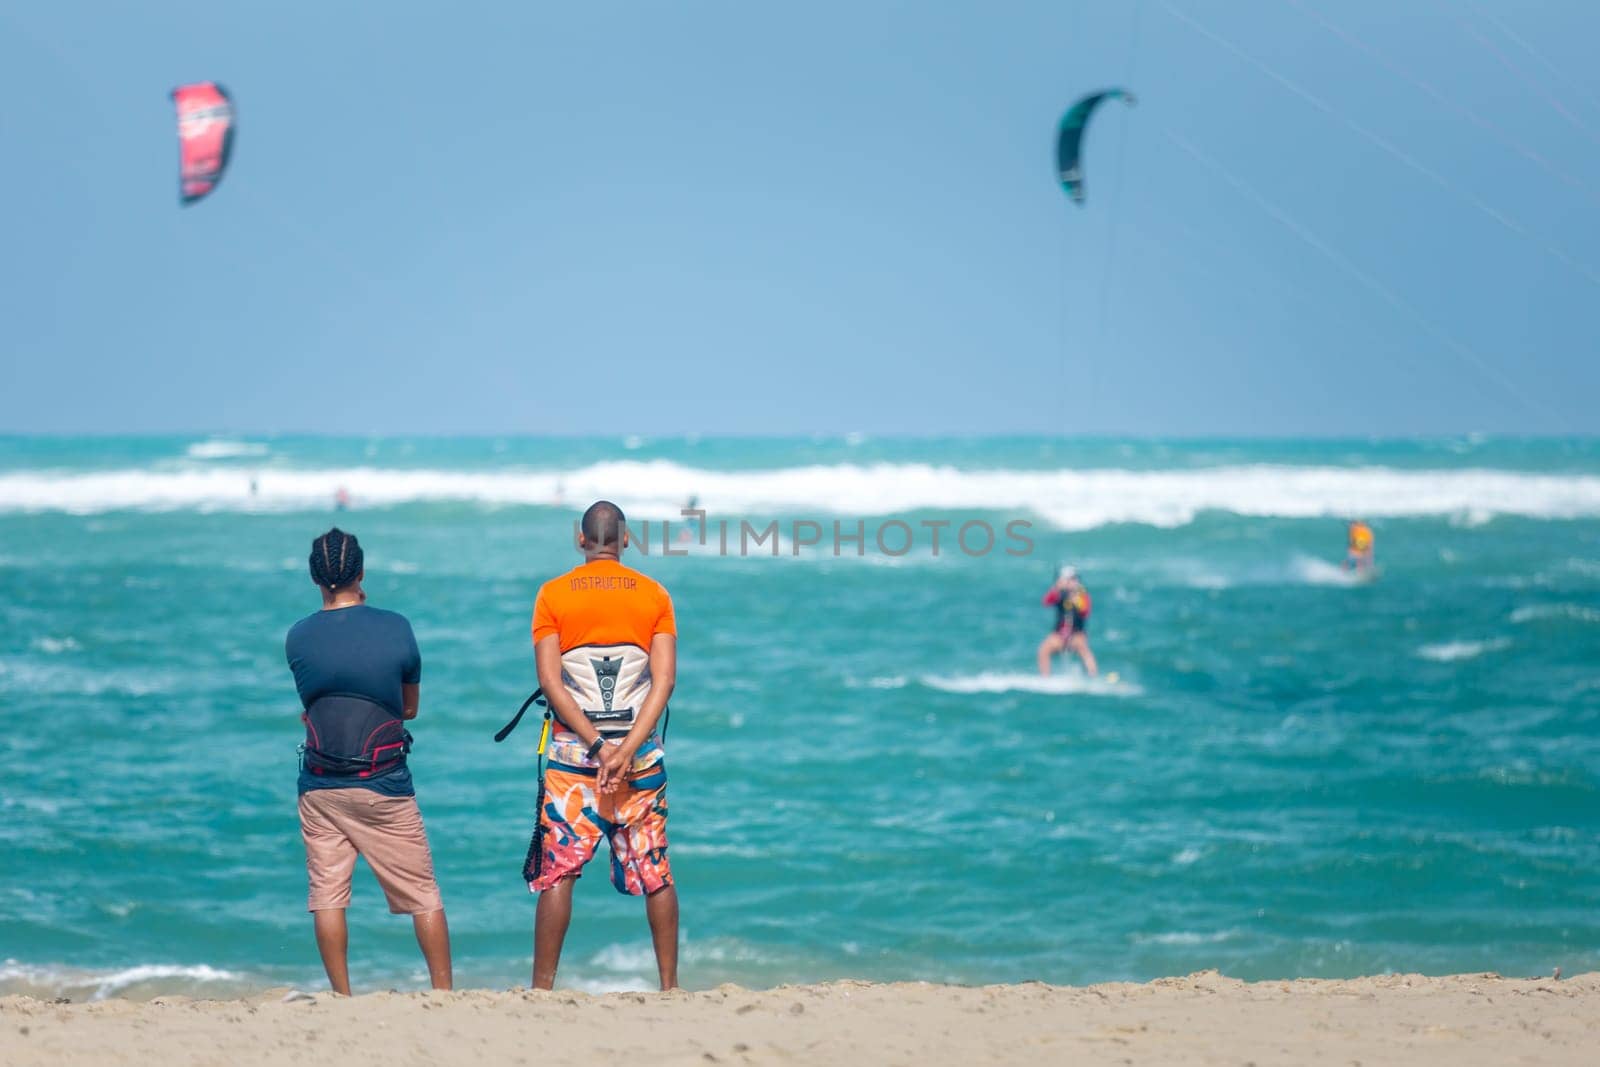 Active sporty people enjoying kitesurfing holidays and activities on perfect sunny day on Cabarete tropical sandy beach in Dominican Republic